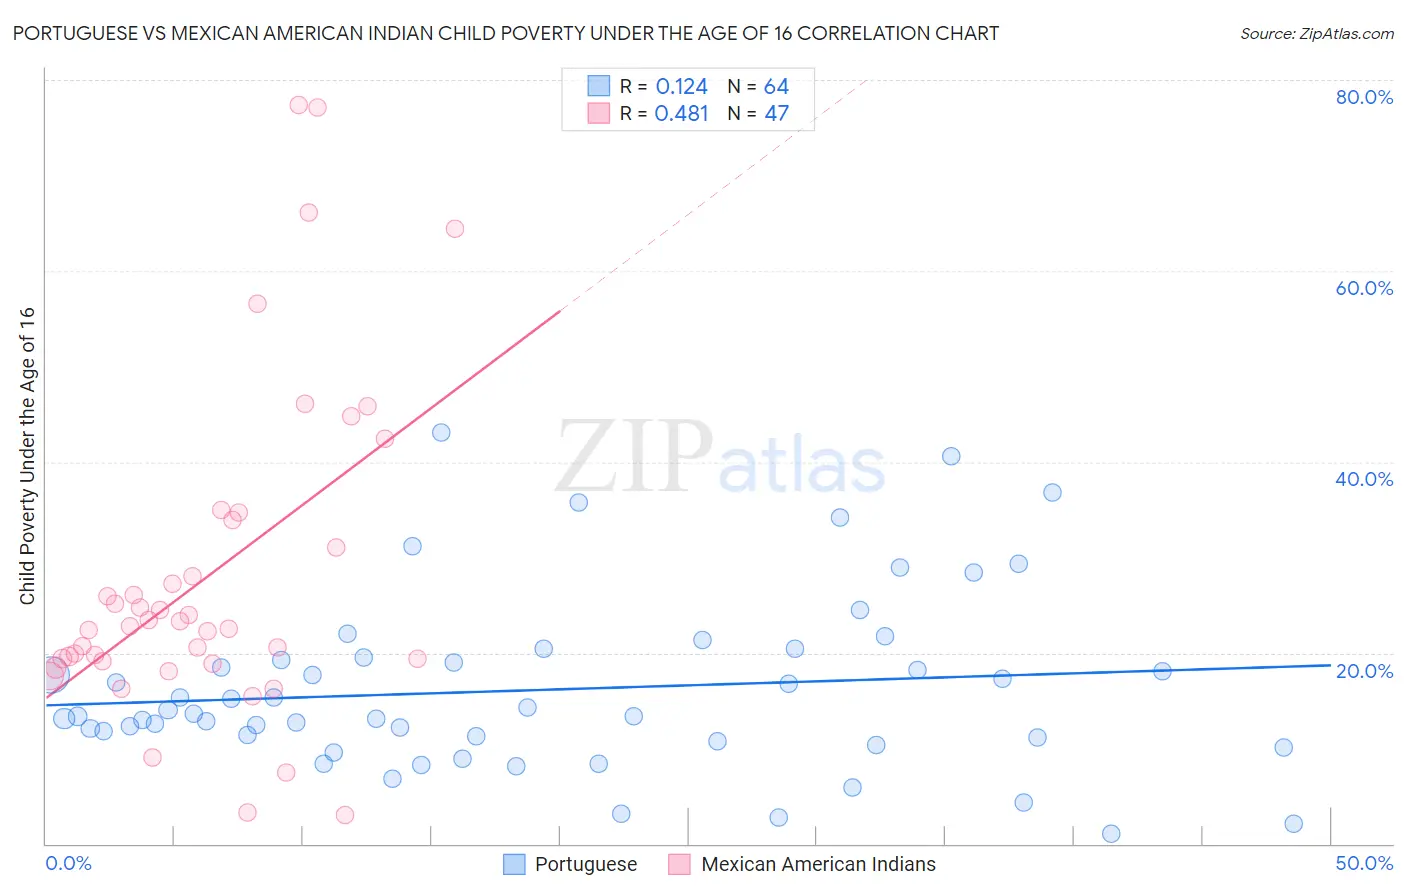 Portuguese vs Mexican American Indian Child Poverty Under the Age of 16